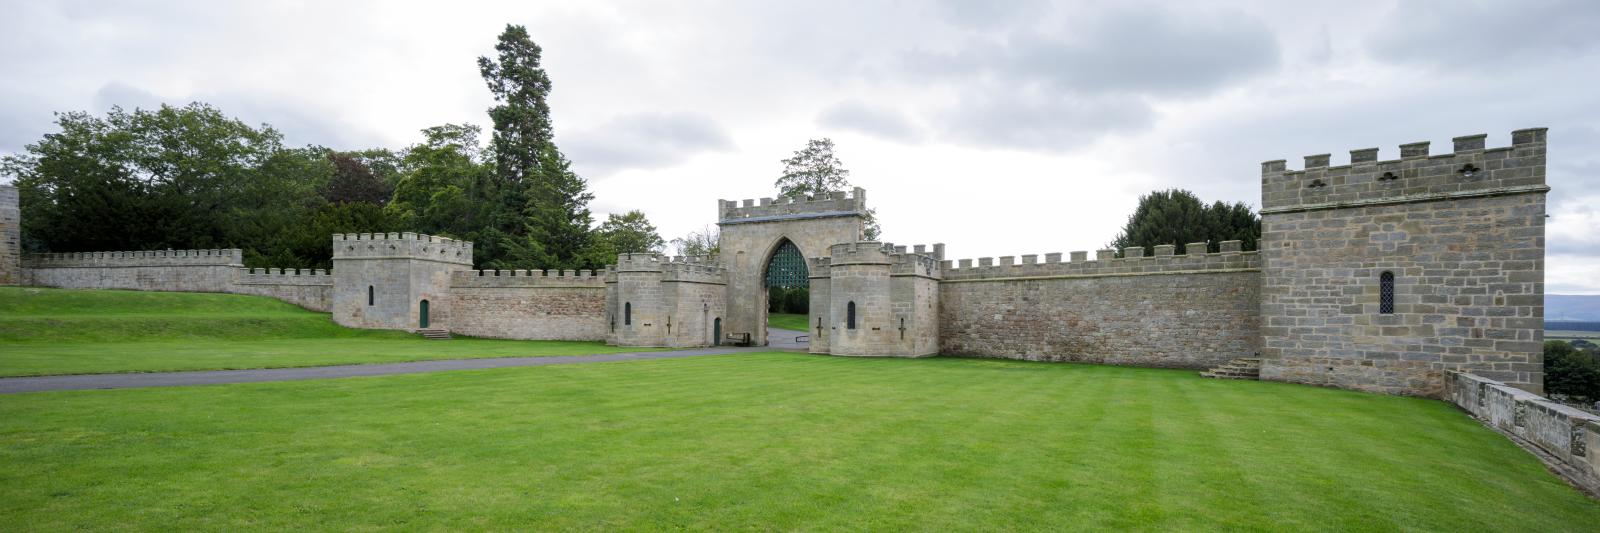 Crenellated castle wall and gateway with expansive lawns in foreground.